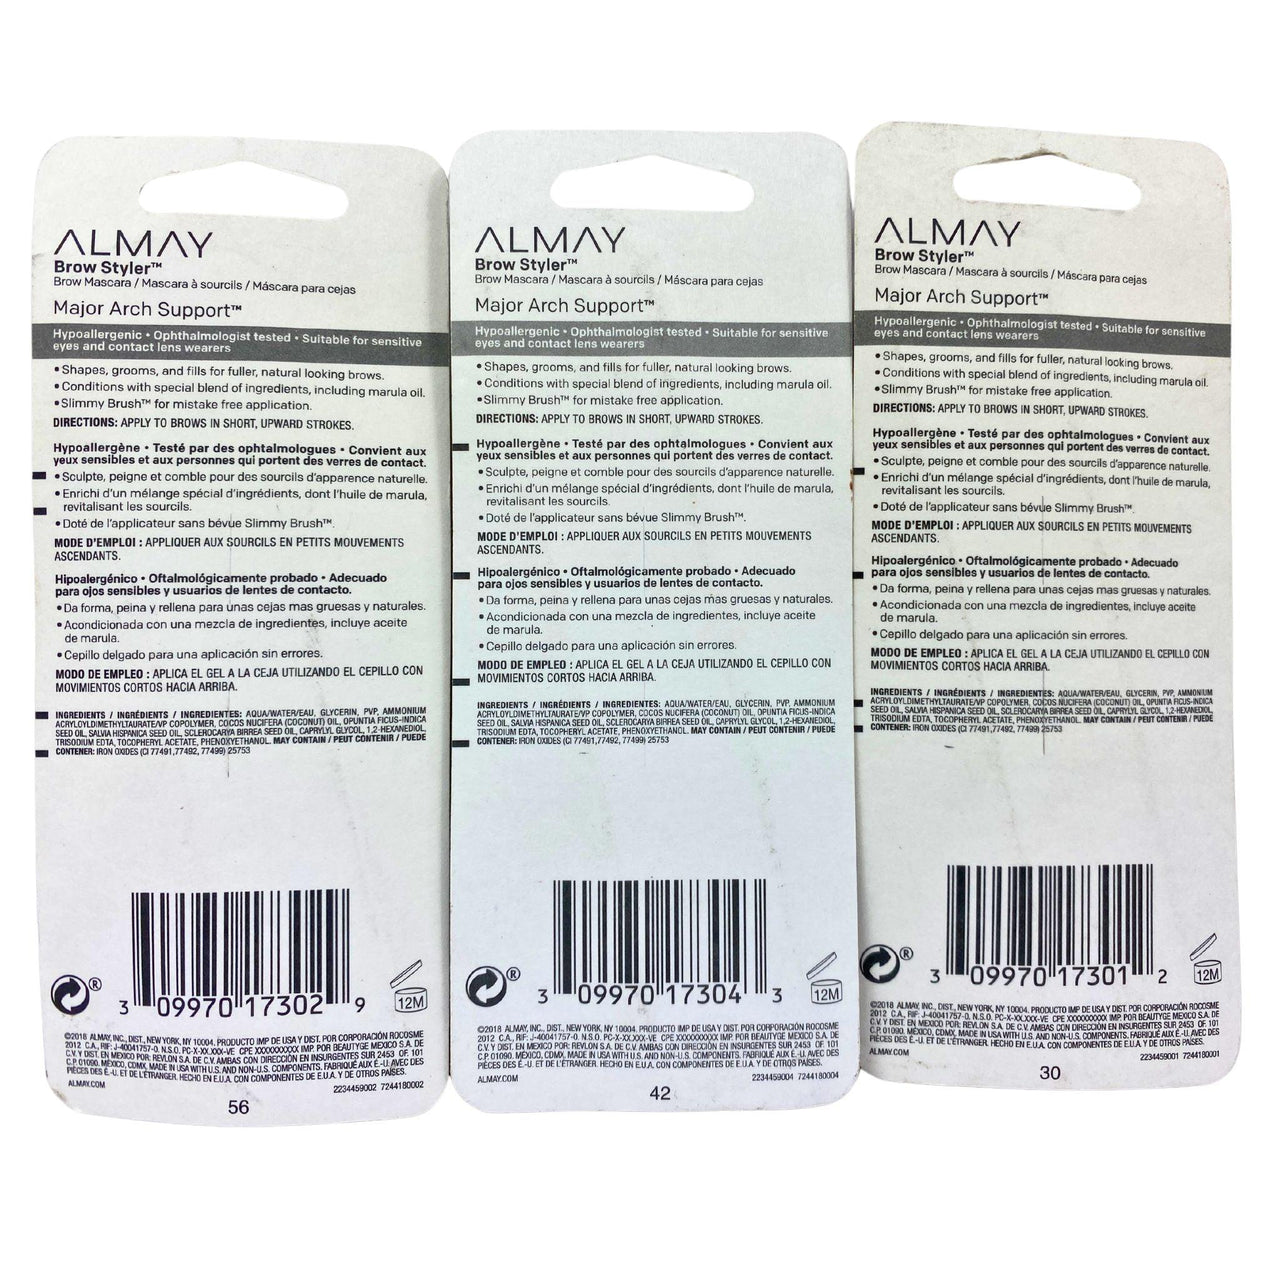 Almay Brow Styler Really Real Brows shapes 0.29OZ Assorted Mix (50 Pcs Lot) - Discount Wholesalers Inc